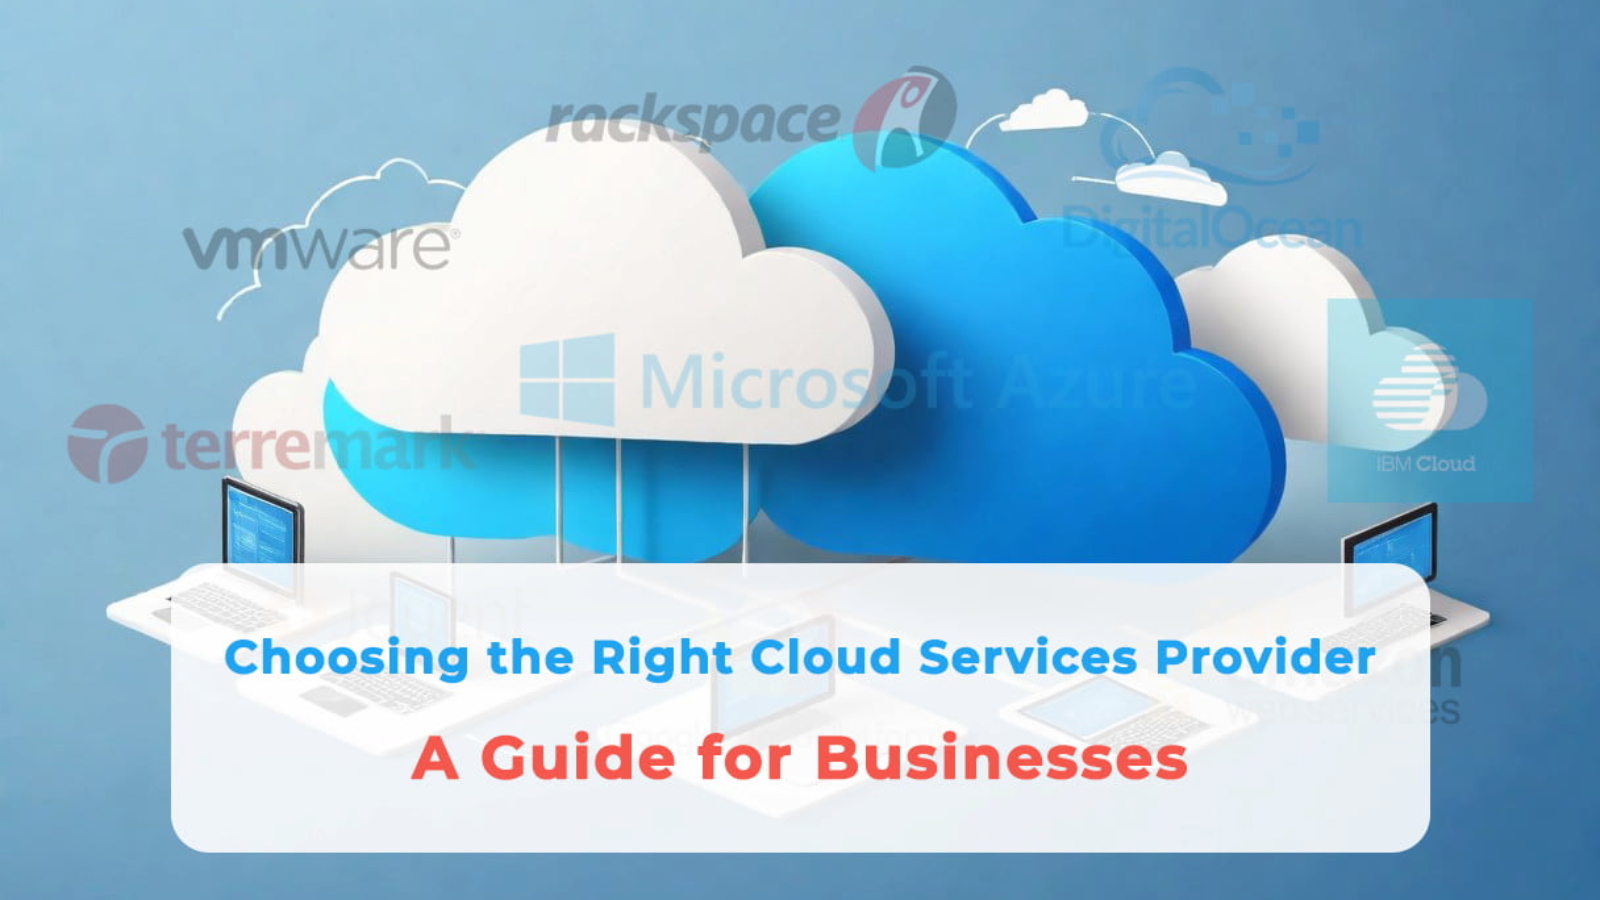 Choosing the Right Cloud Services Provider: A Guide for Businesses